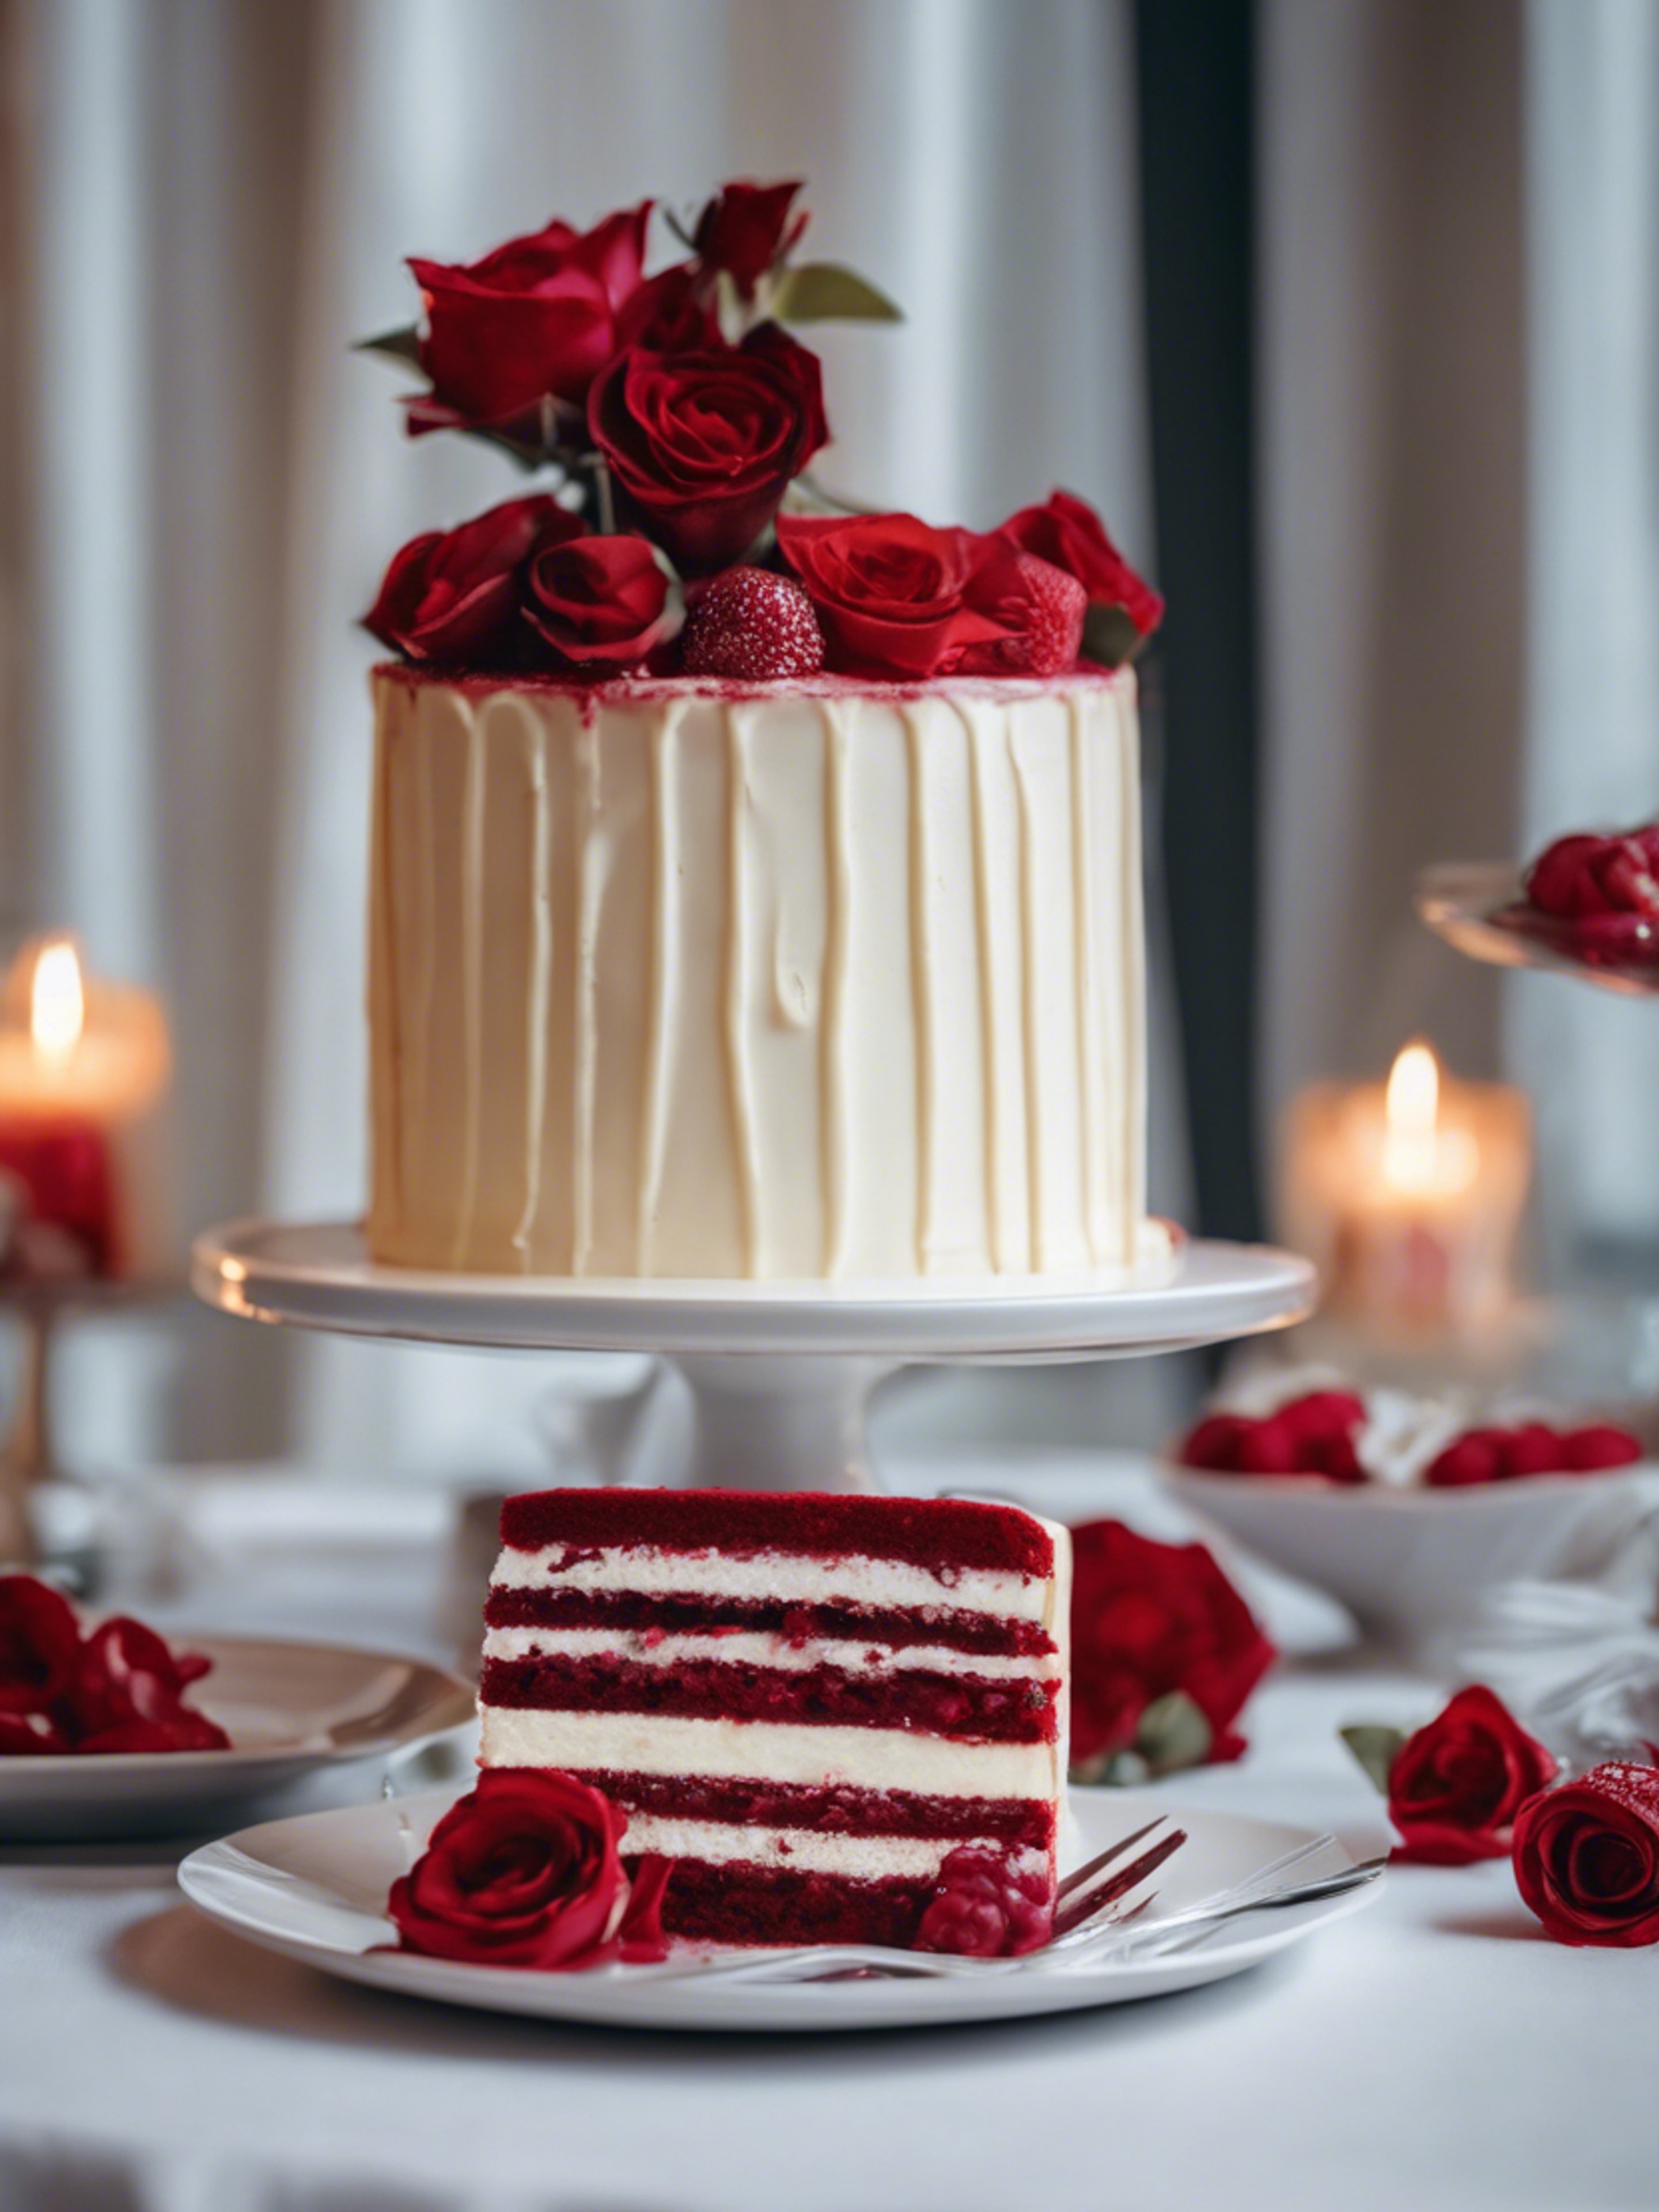 A scrumptious red velvet and white cream layered cake on a dessert table. Шпалери[9c378ca78b014f2daafb]